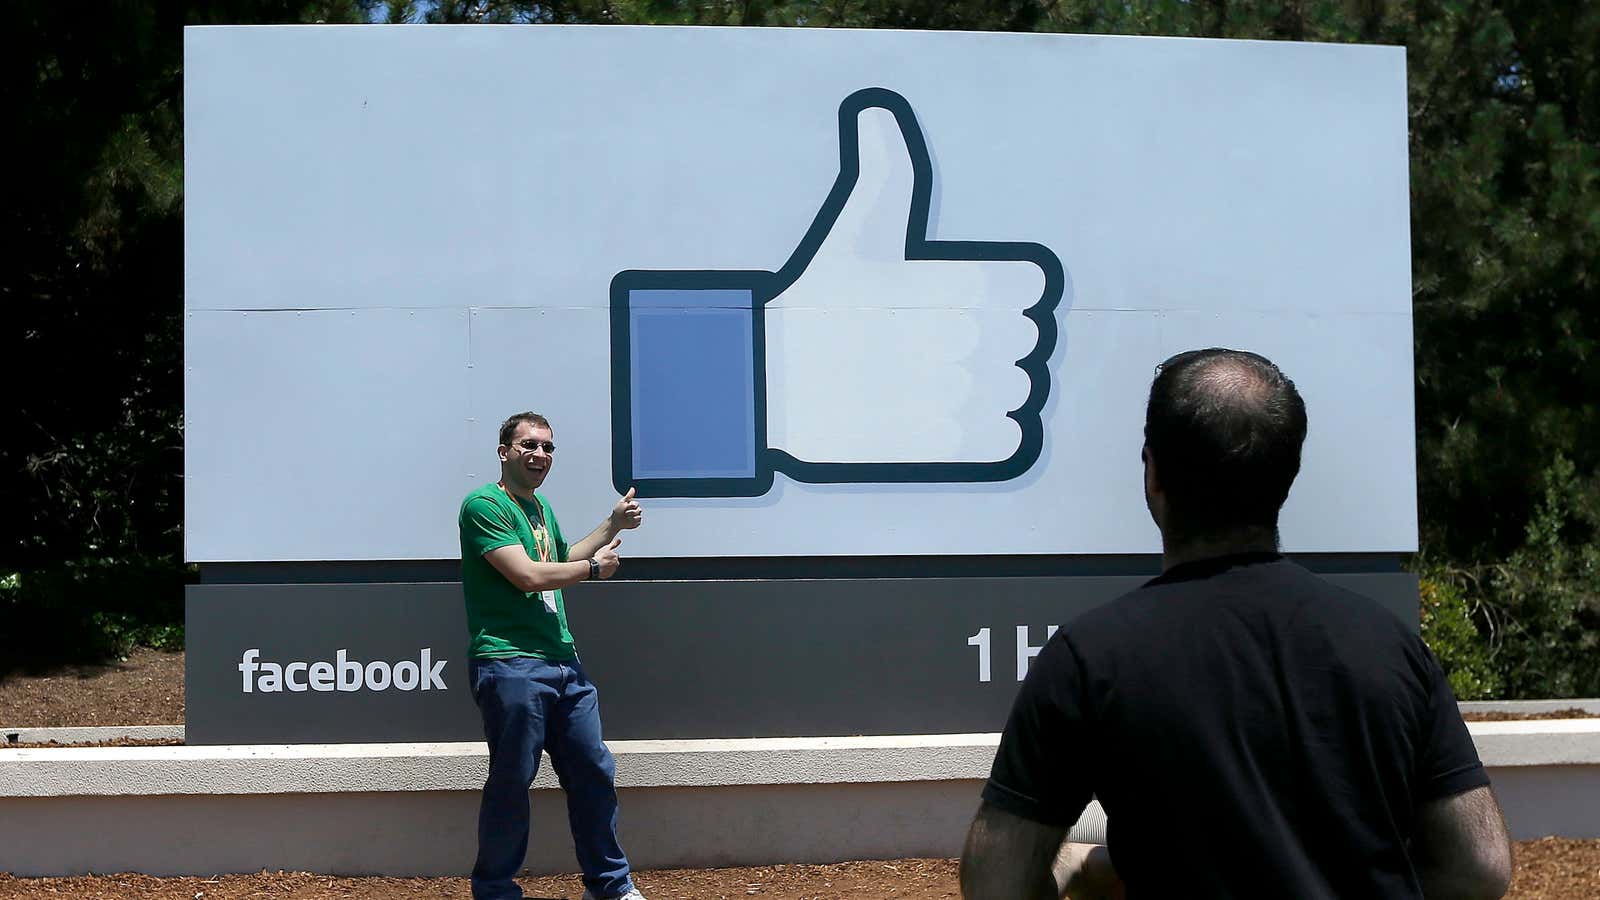 Not everyone is OK with Facebook’s latest exploits.